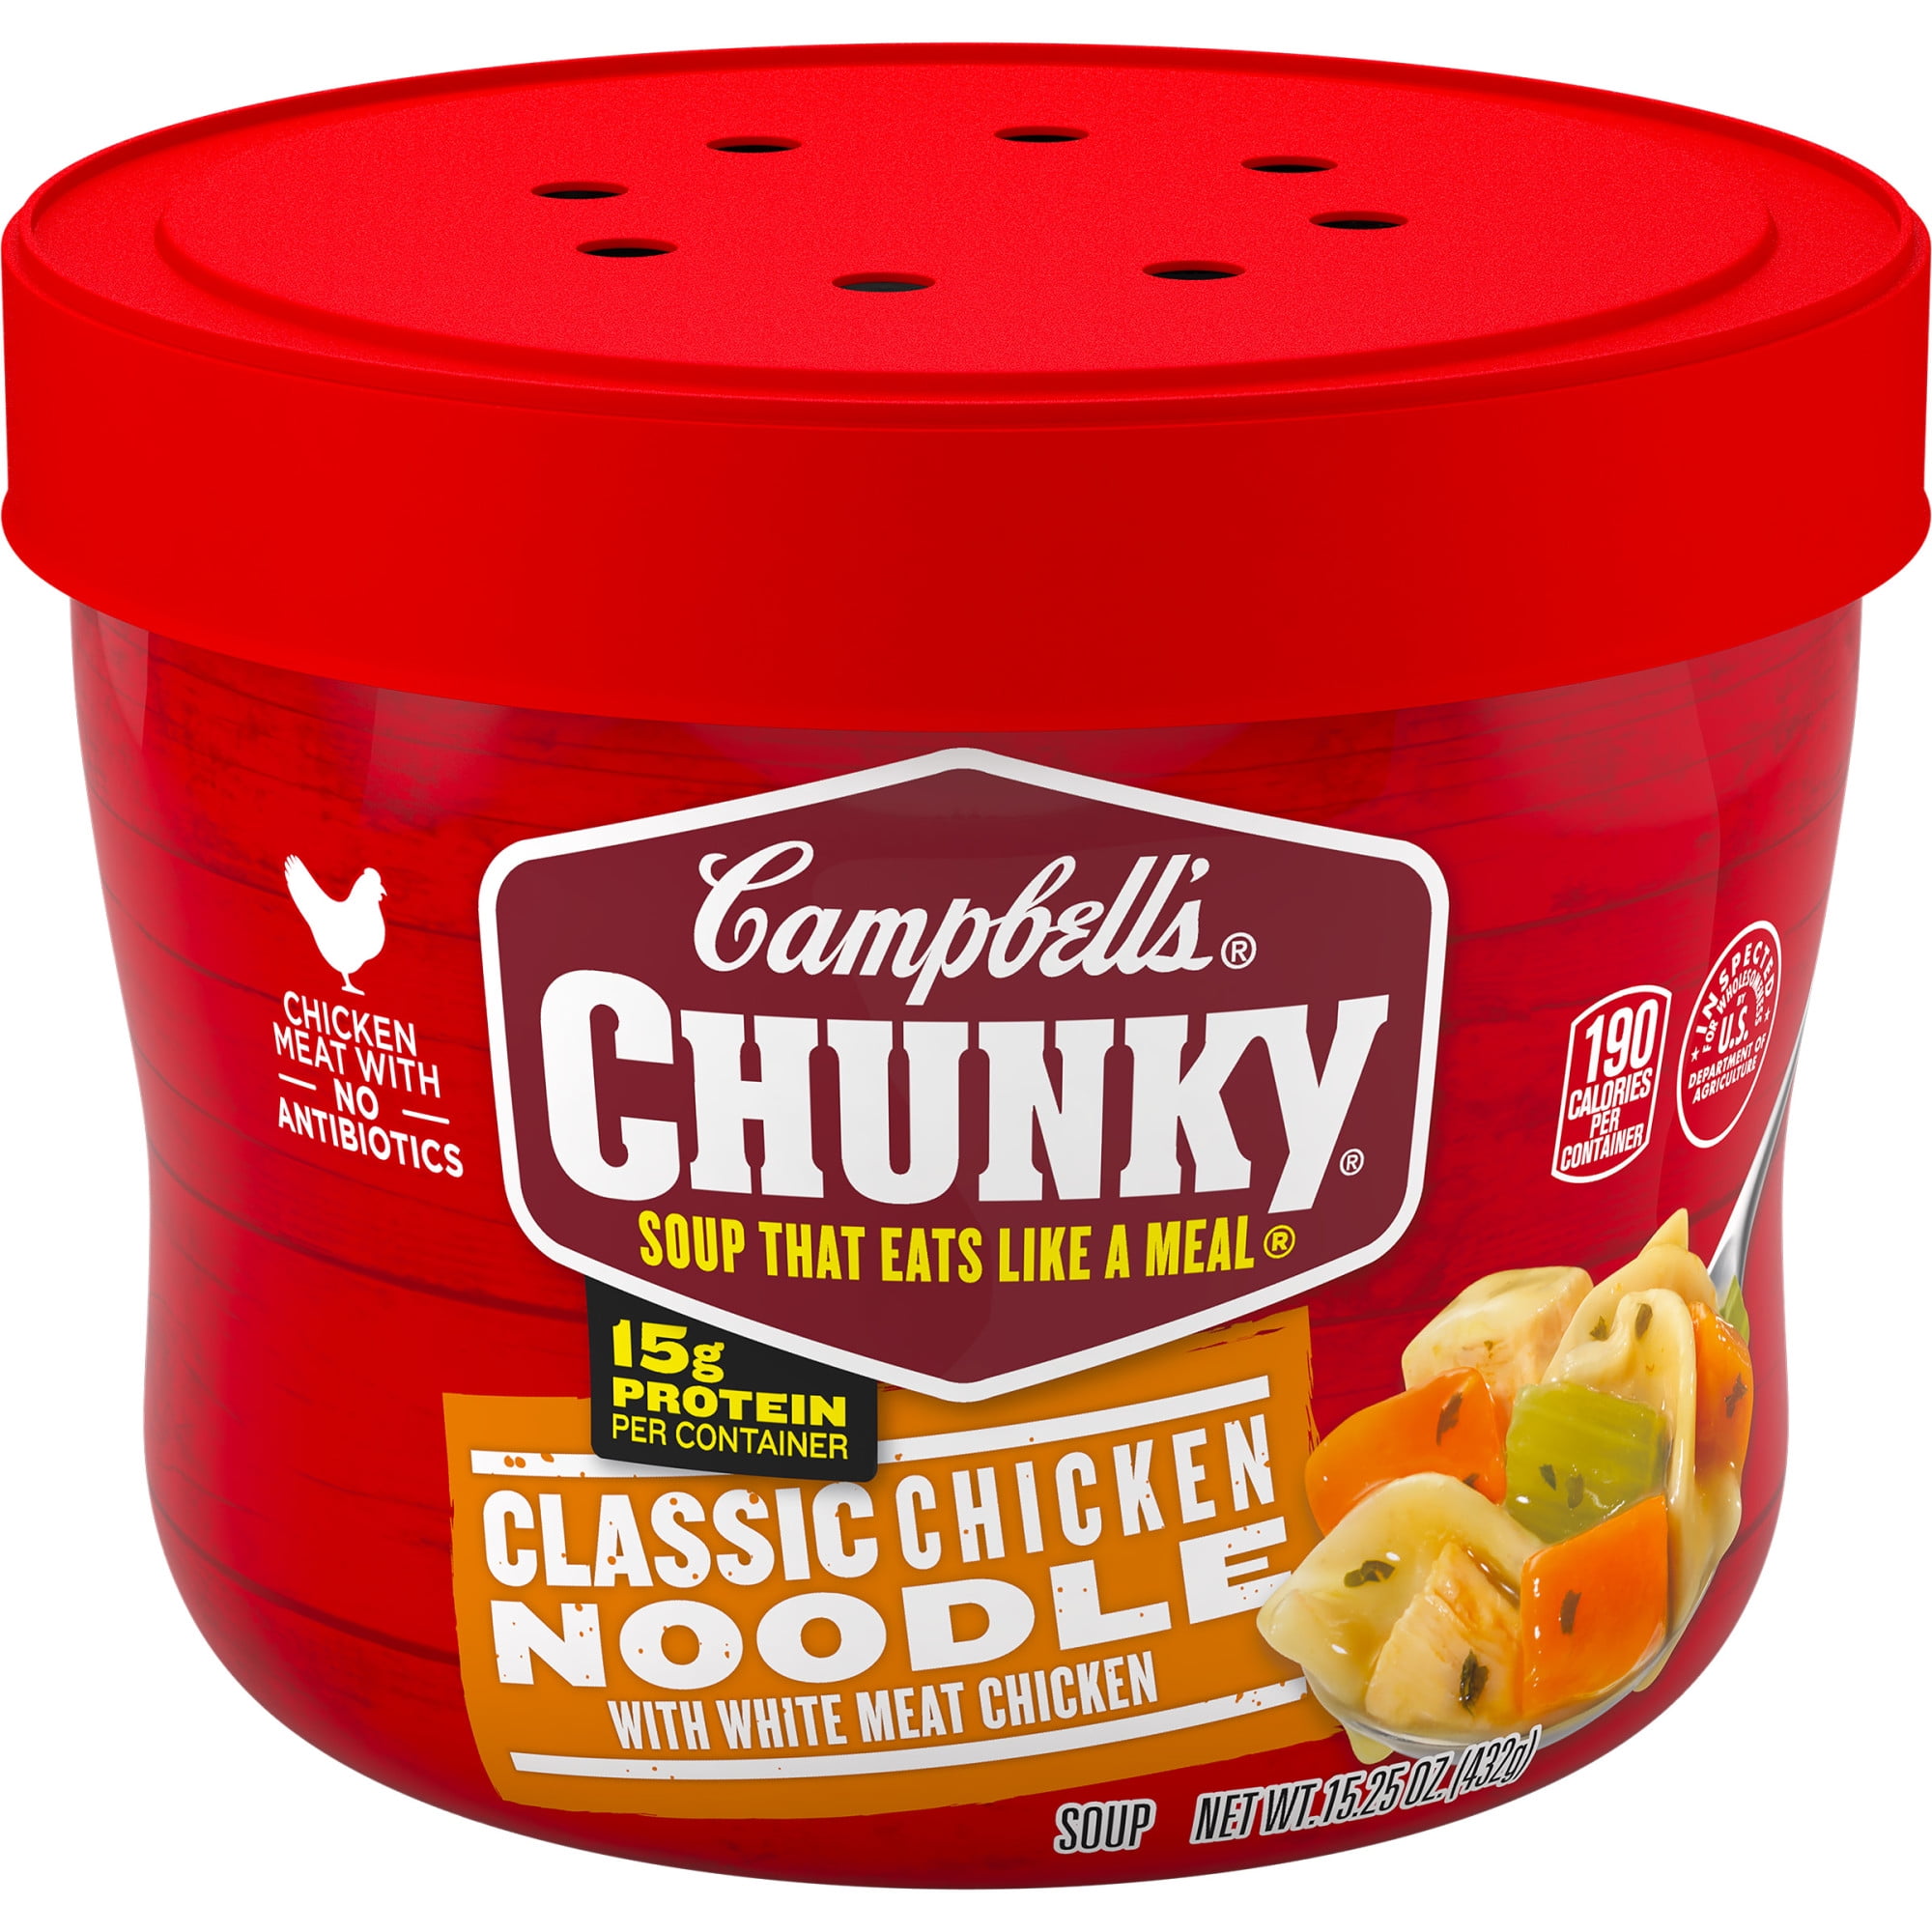 Campbell's Chunky Soup, Ready to Serve Classic Chicken Noodle Soup, 15.25 Oz Microwavable Bowl